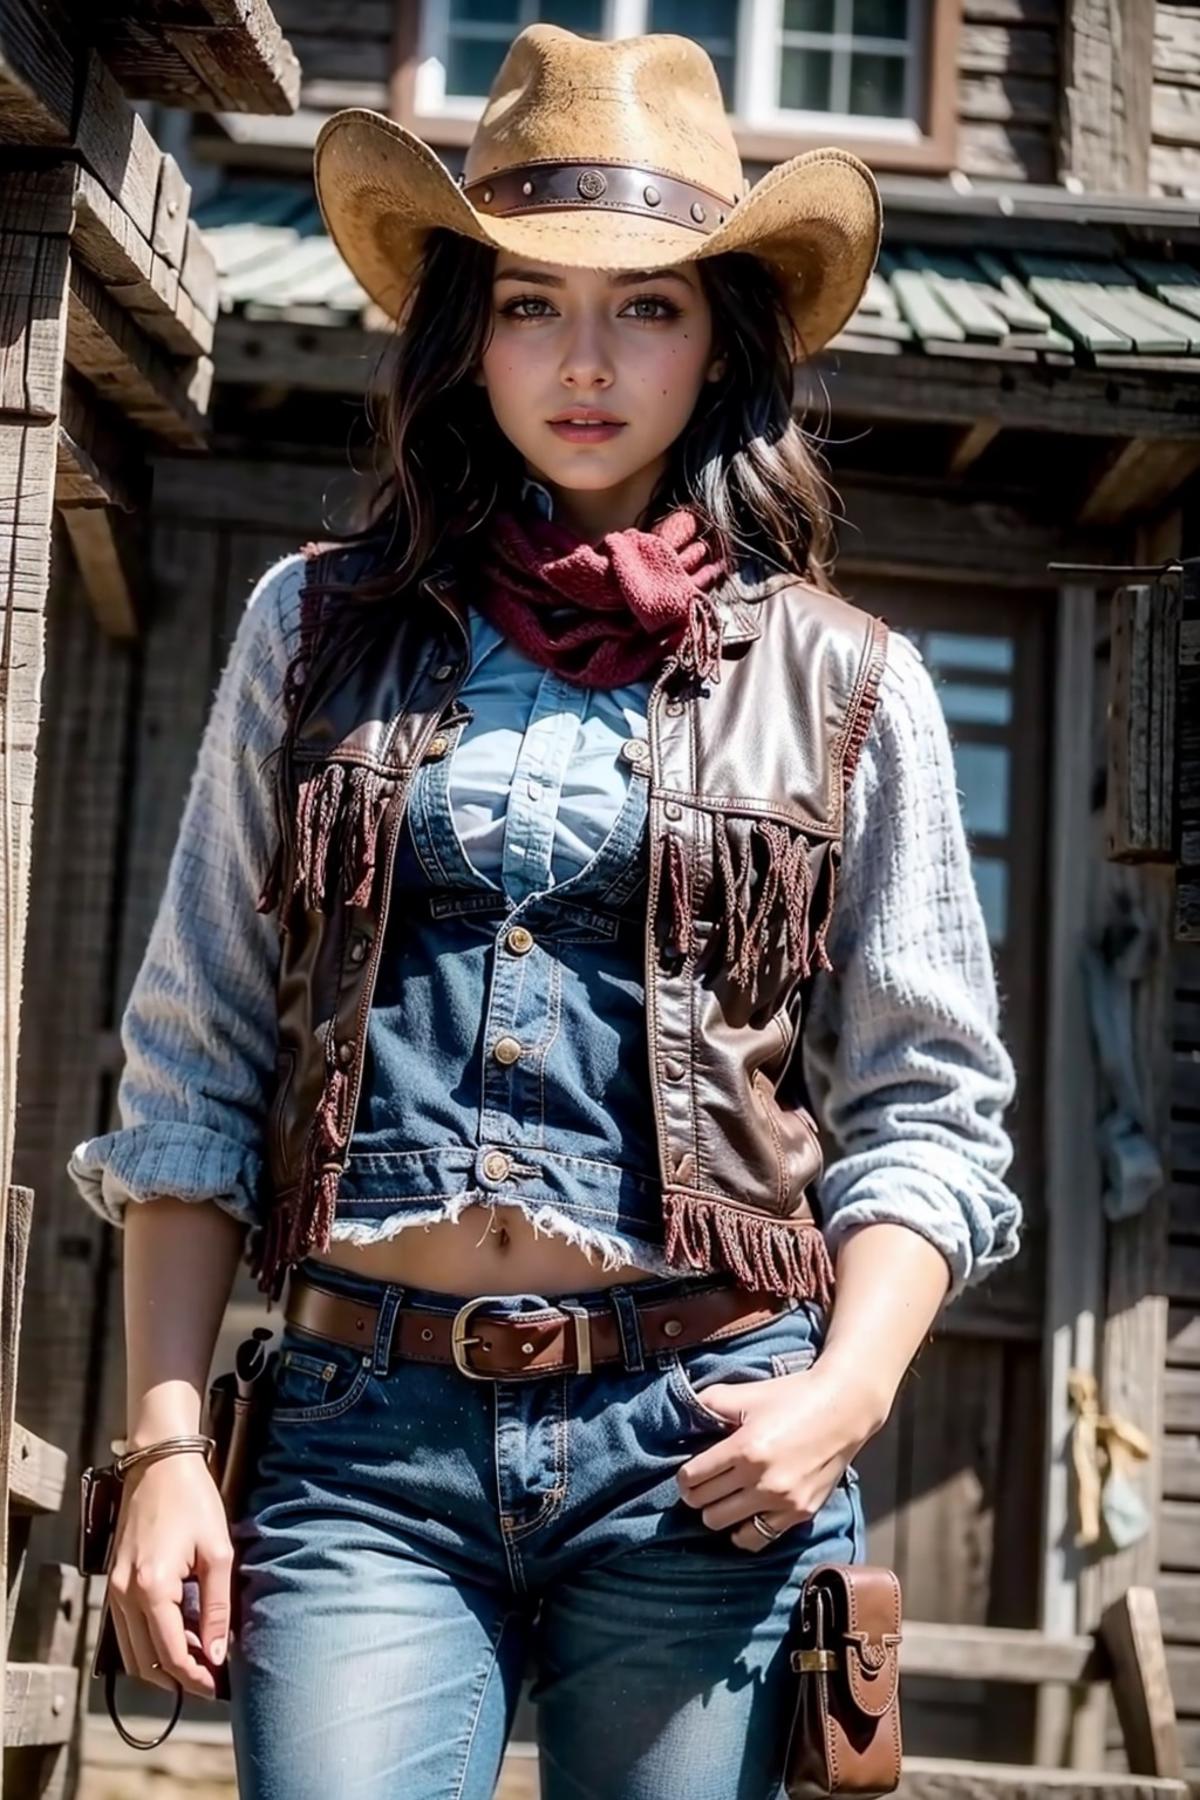 Cowgirl outfit image by feetie